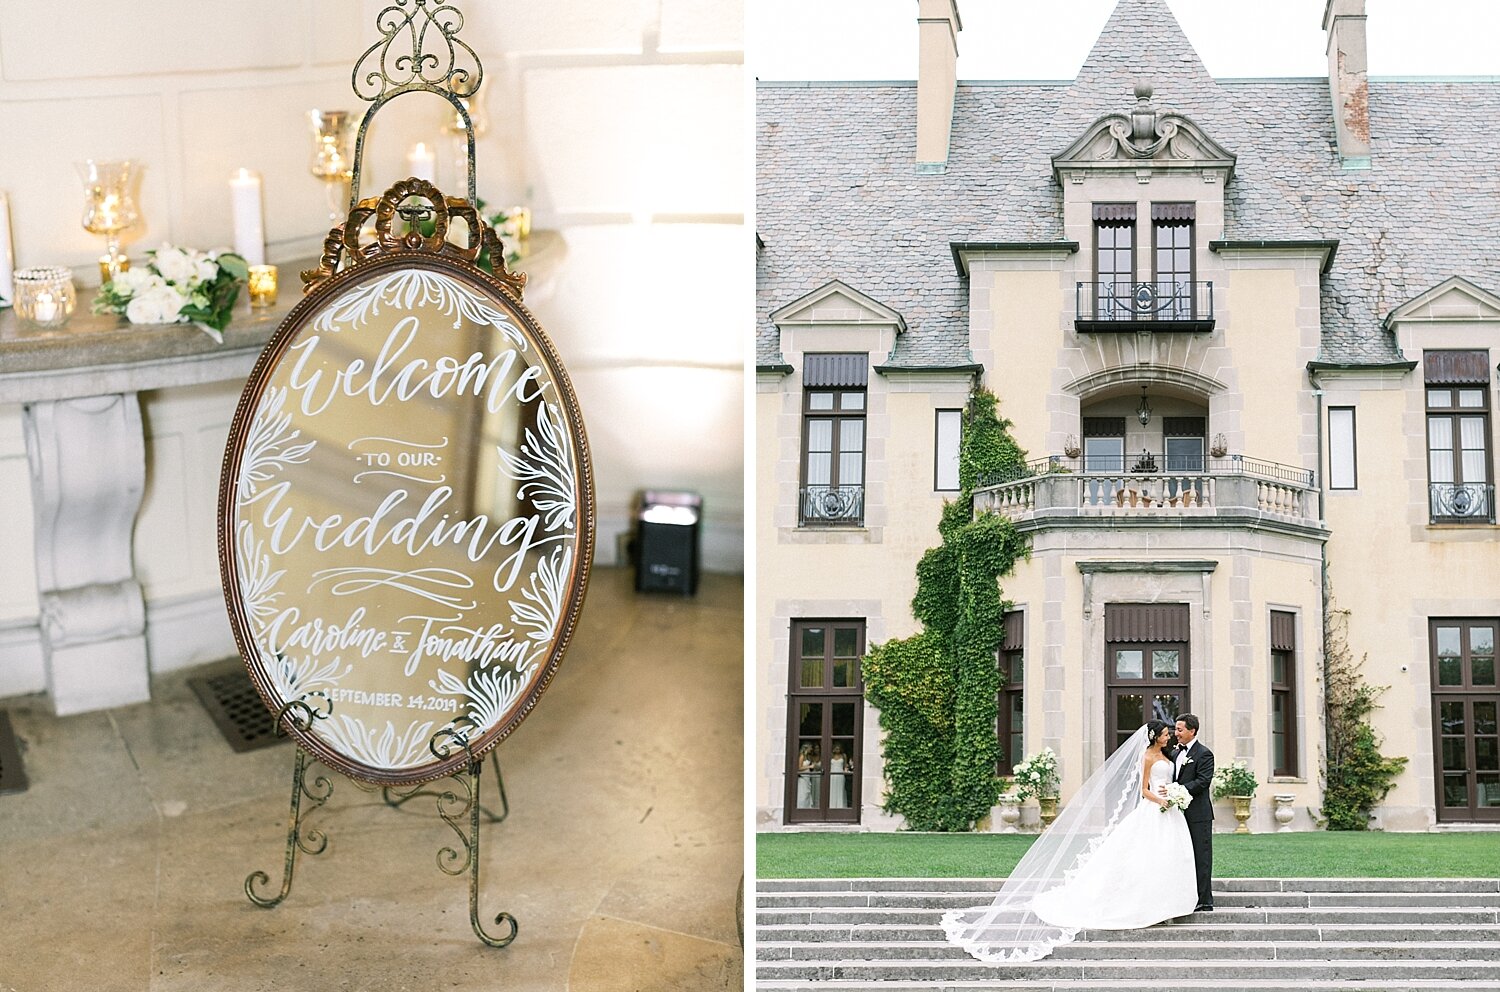 Oheka Castle wedding reception details photographed by Asher Gardner Photography